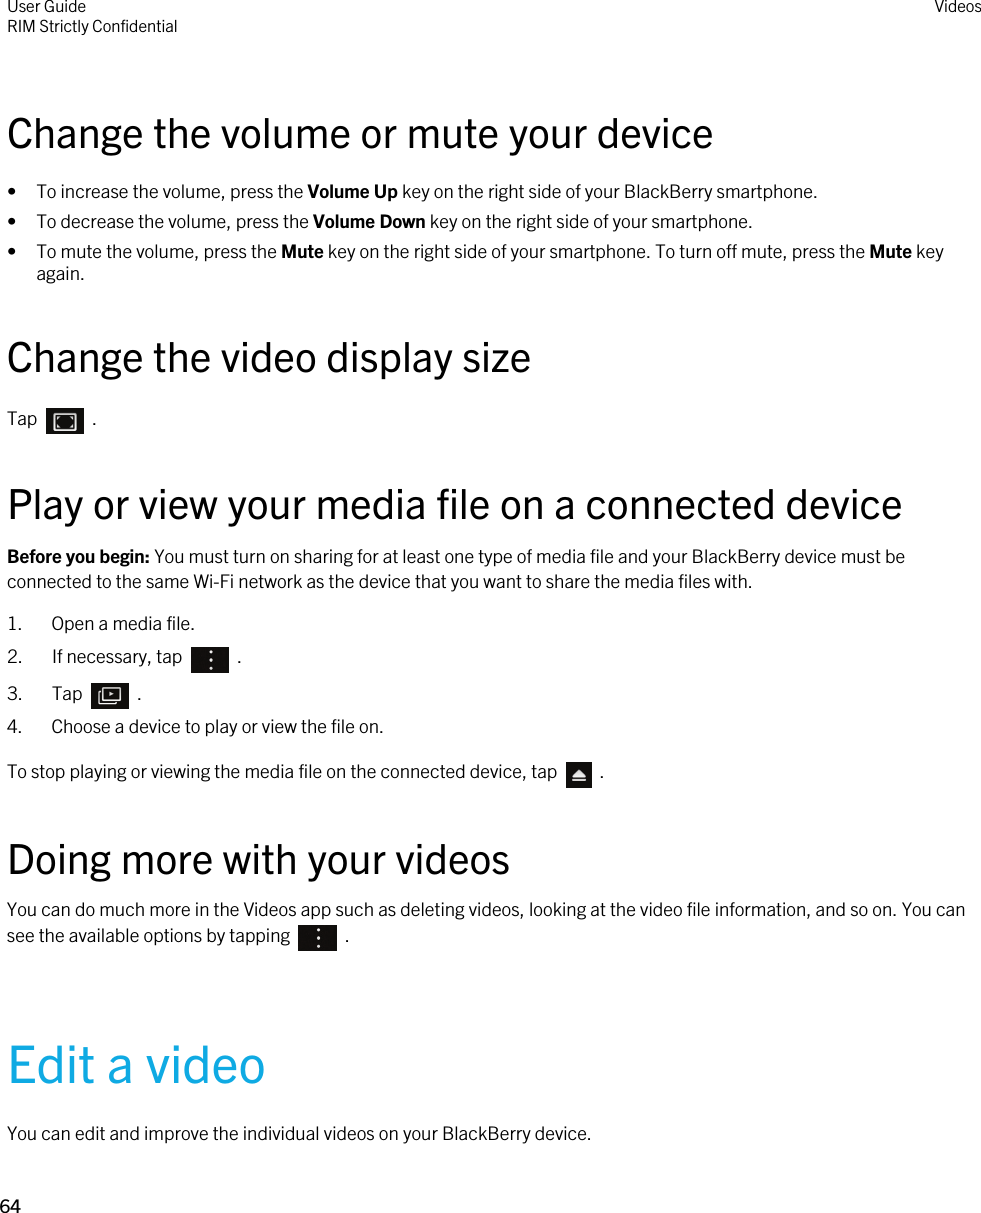 Change the volume or mute your device• To increase the volume, press the Volume Up key on the right side of your BlackBerry smartphone.• To decrease the volume, press the Volume Down key on the right side of your smartphone.• To mute the volume, press the Mute key on the right side of your smartphone. To turn off mute, press the Mute key again.Change the video display sizeTap    .Play or view your media file on a connected deviceBefore you begin: You must turn on sharing for at least one type of media file and your BlackBerry device must be connected to the same Wi-Fi network as the device that you want to share the media files with.1. Open a media file.2.  If necessary, tap    .3.  Tap    .4. Choose a device to play or view the file on.To stop playing or viewing the media file on the connected device, tap    .Doing more with your videosYou can do much more in the Videos app such as deleting videos, looking at the video file information, and so on. You can see the available options by tapping    .Edit a videoYou can edit and improve the individual videos on your BlackBerry device.User GuideRIM Strictly Confidential Videos64 